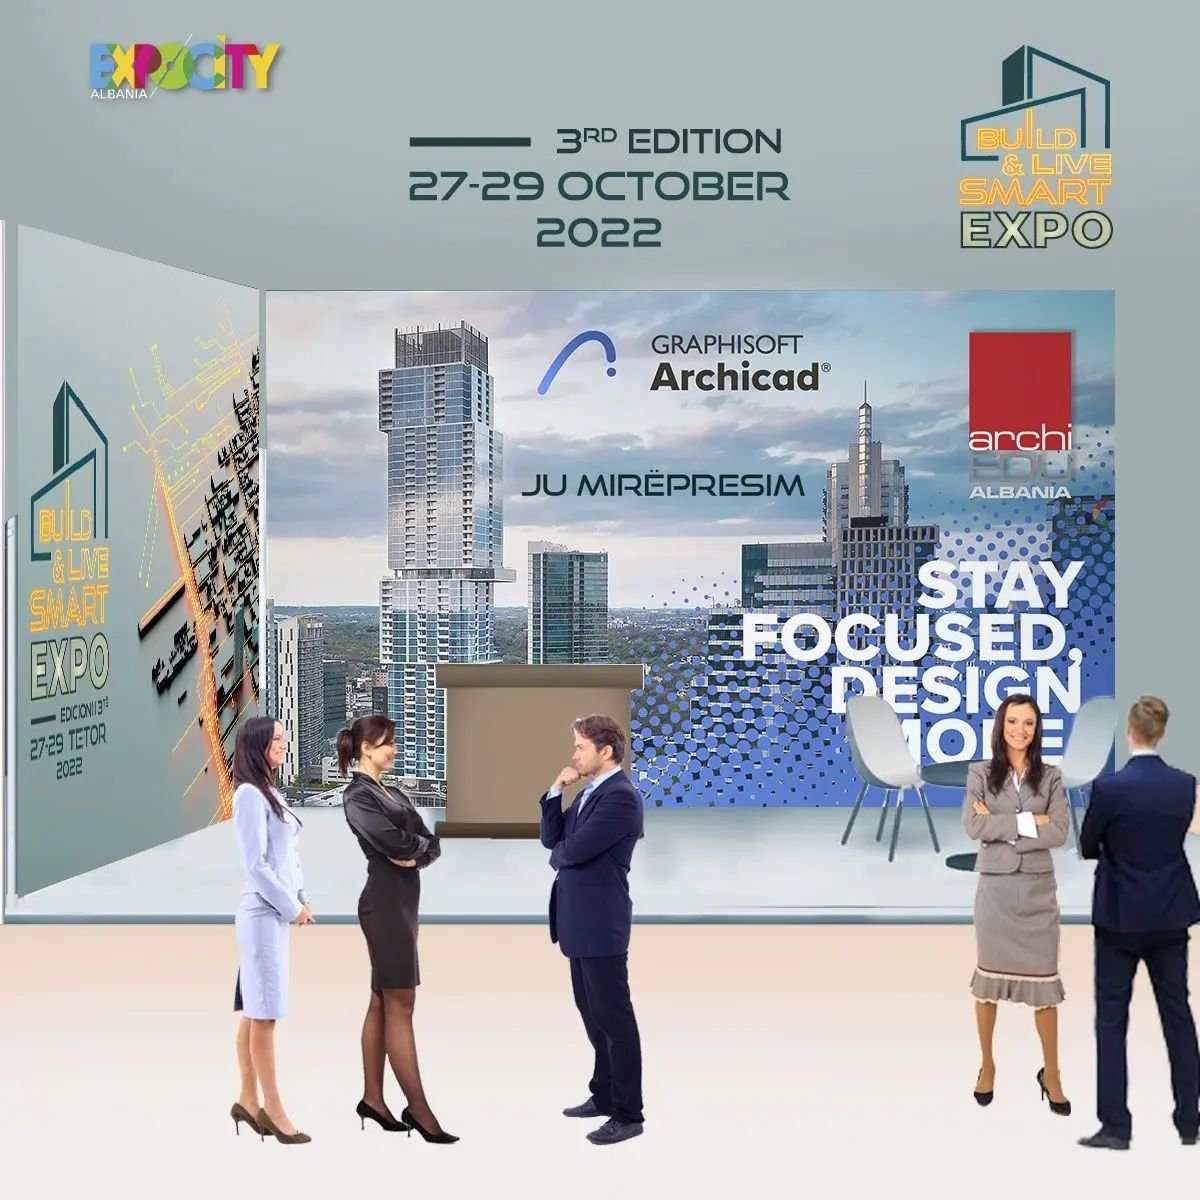 Visit us at Expo City Albania (Build &amp; Live Smart Expo 2022) 27-29 October 2022